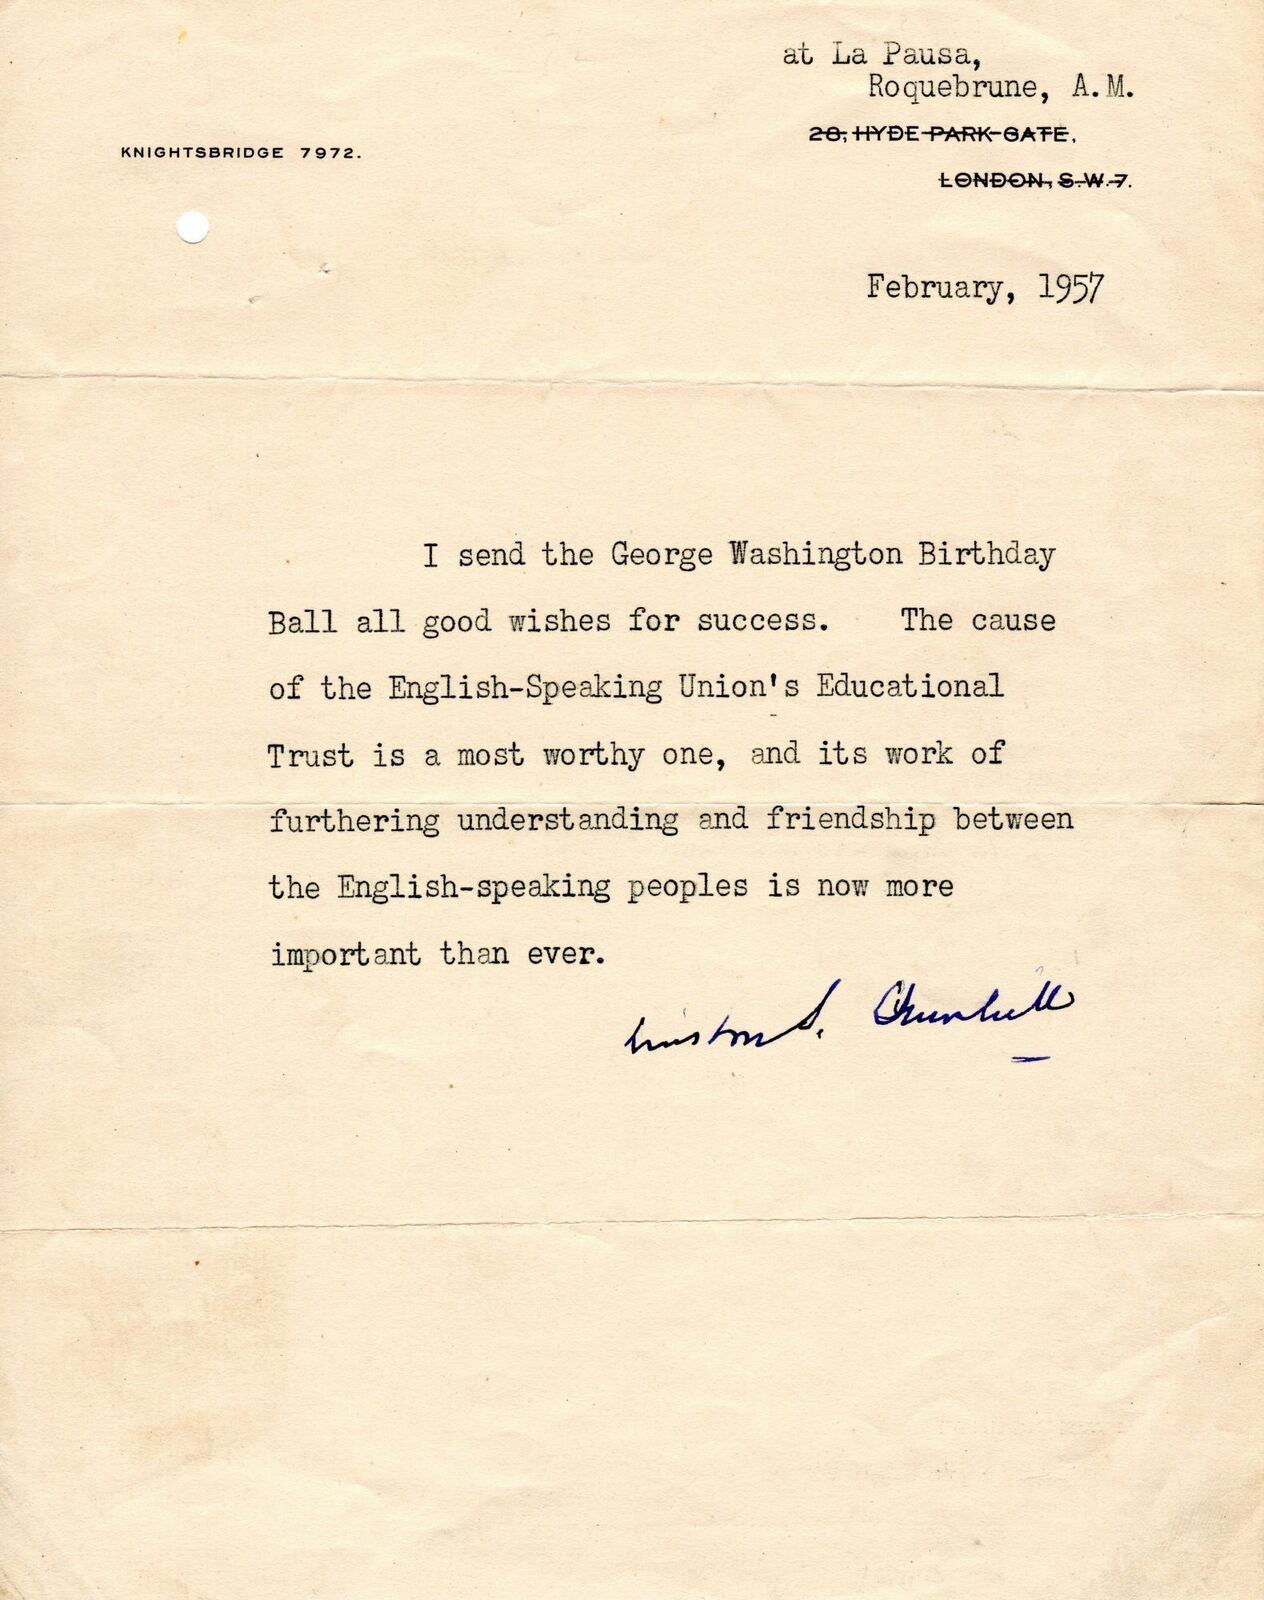 Winston Churchill Emphasizes the Importance of Friendship Between Signed